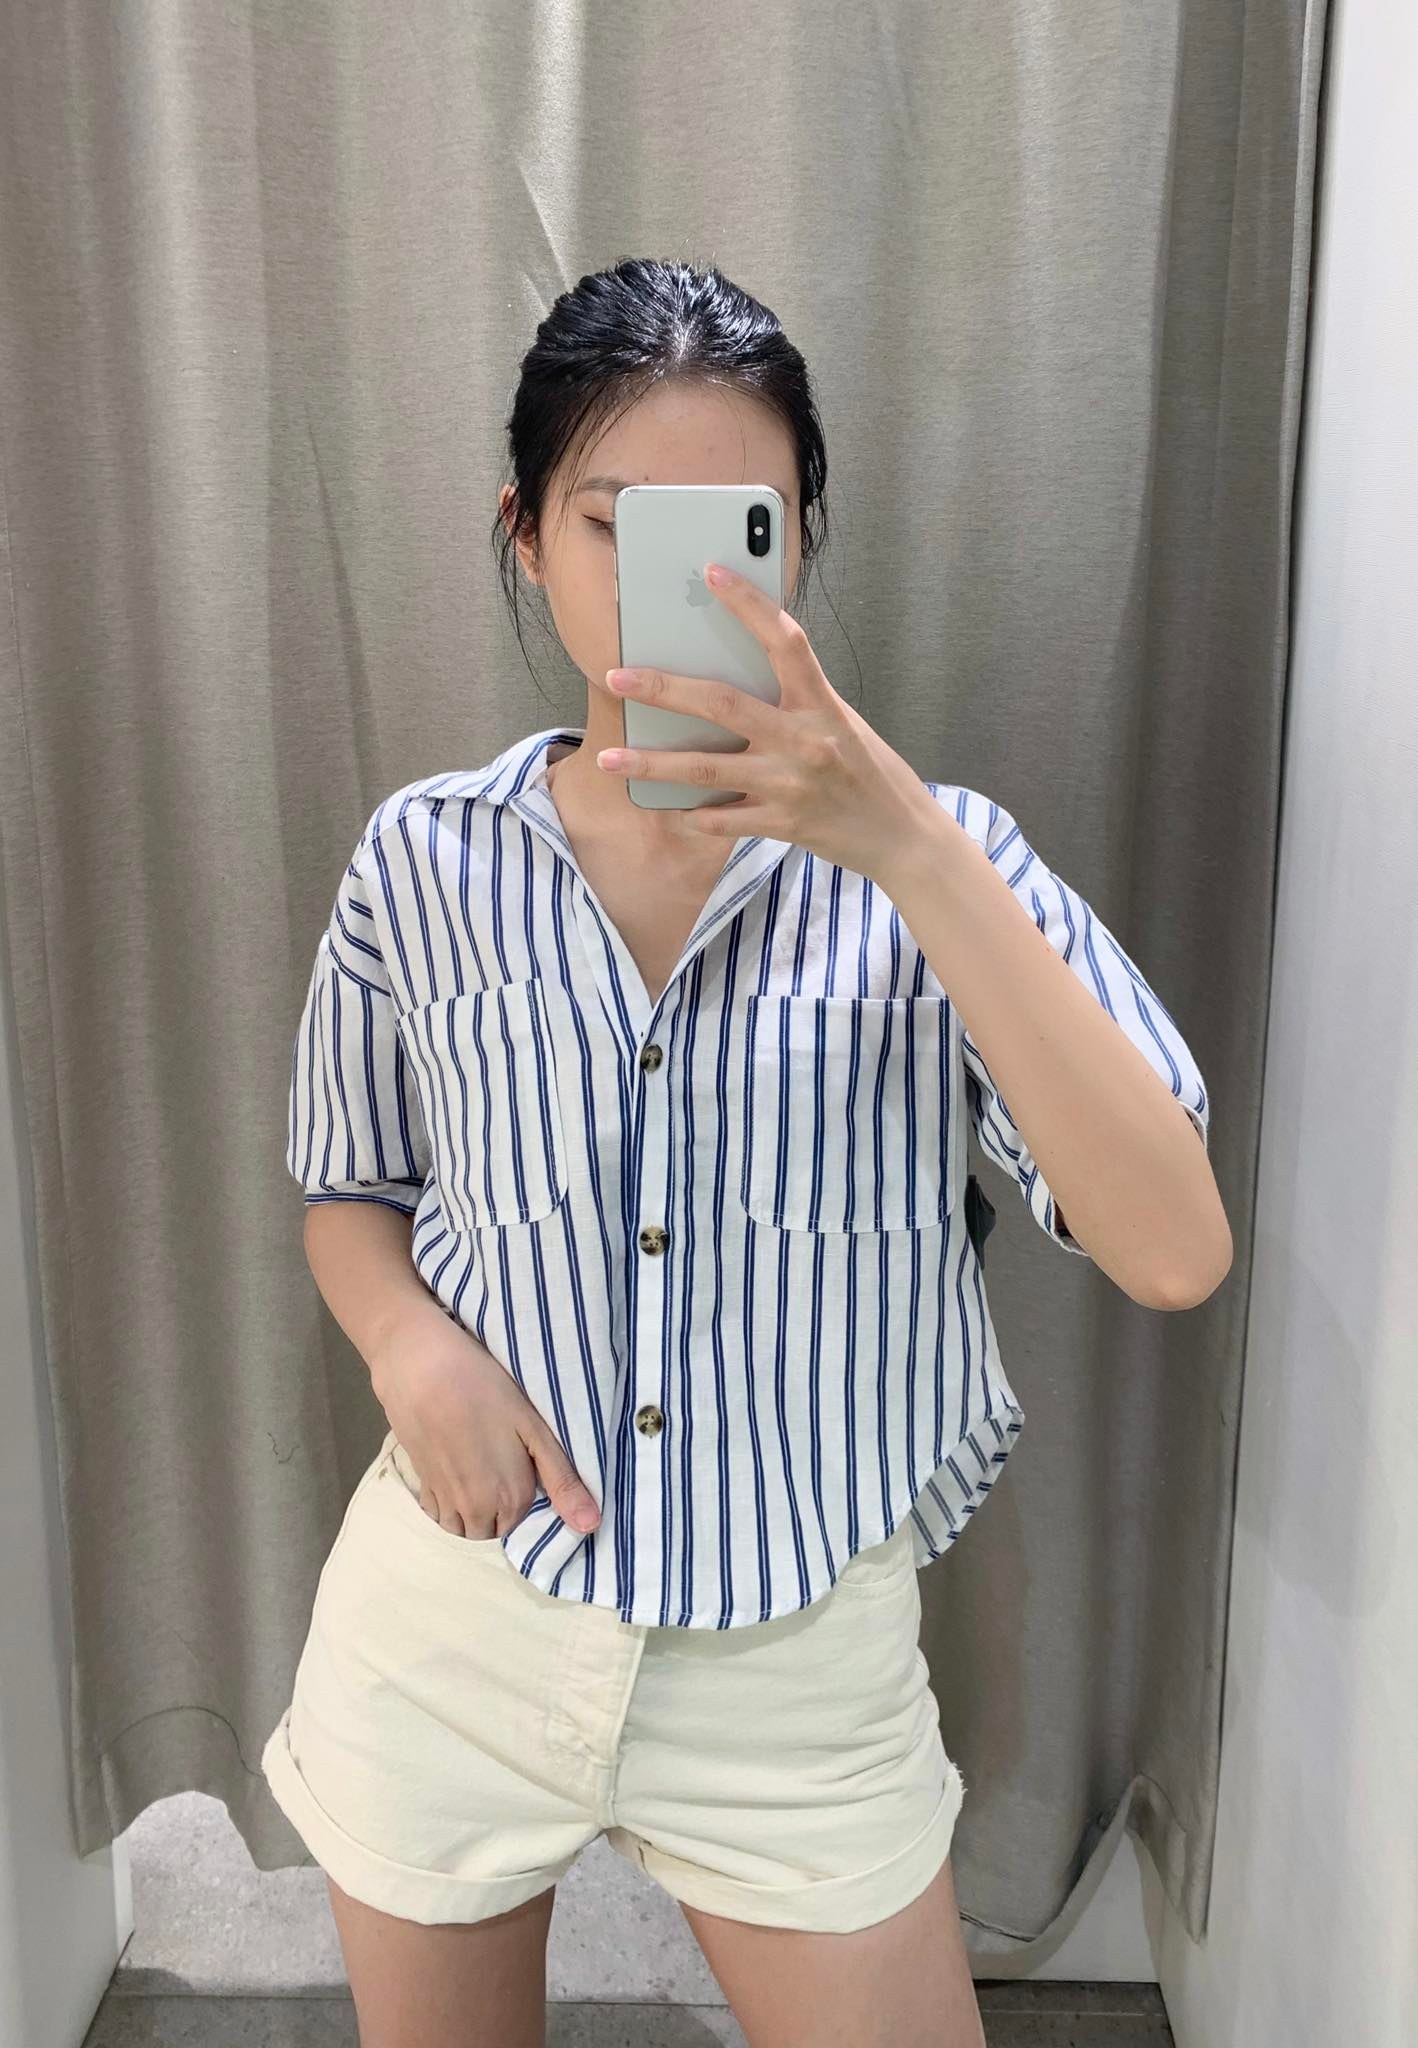 Go to Zara, H&M, Mango to shop for shirts: I picked up 8 models priced from 399k, dressed up stylishly, but the elegant score was also high - Photo 14.